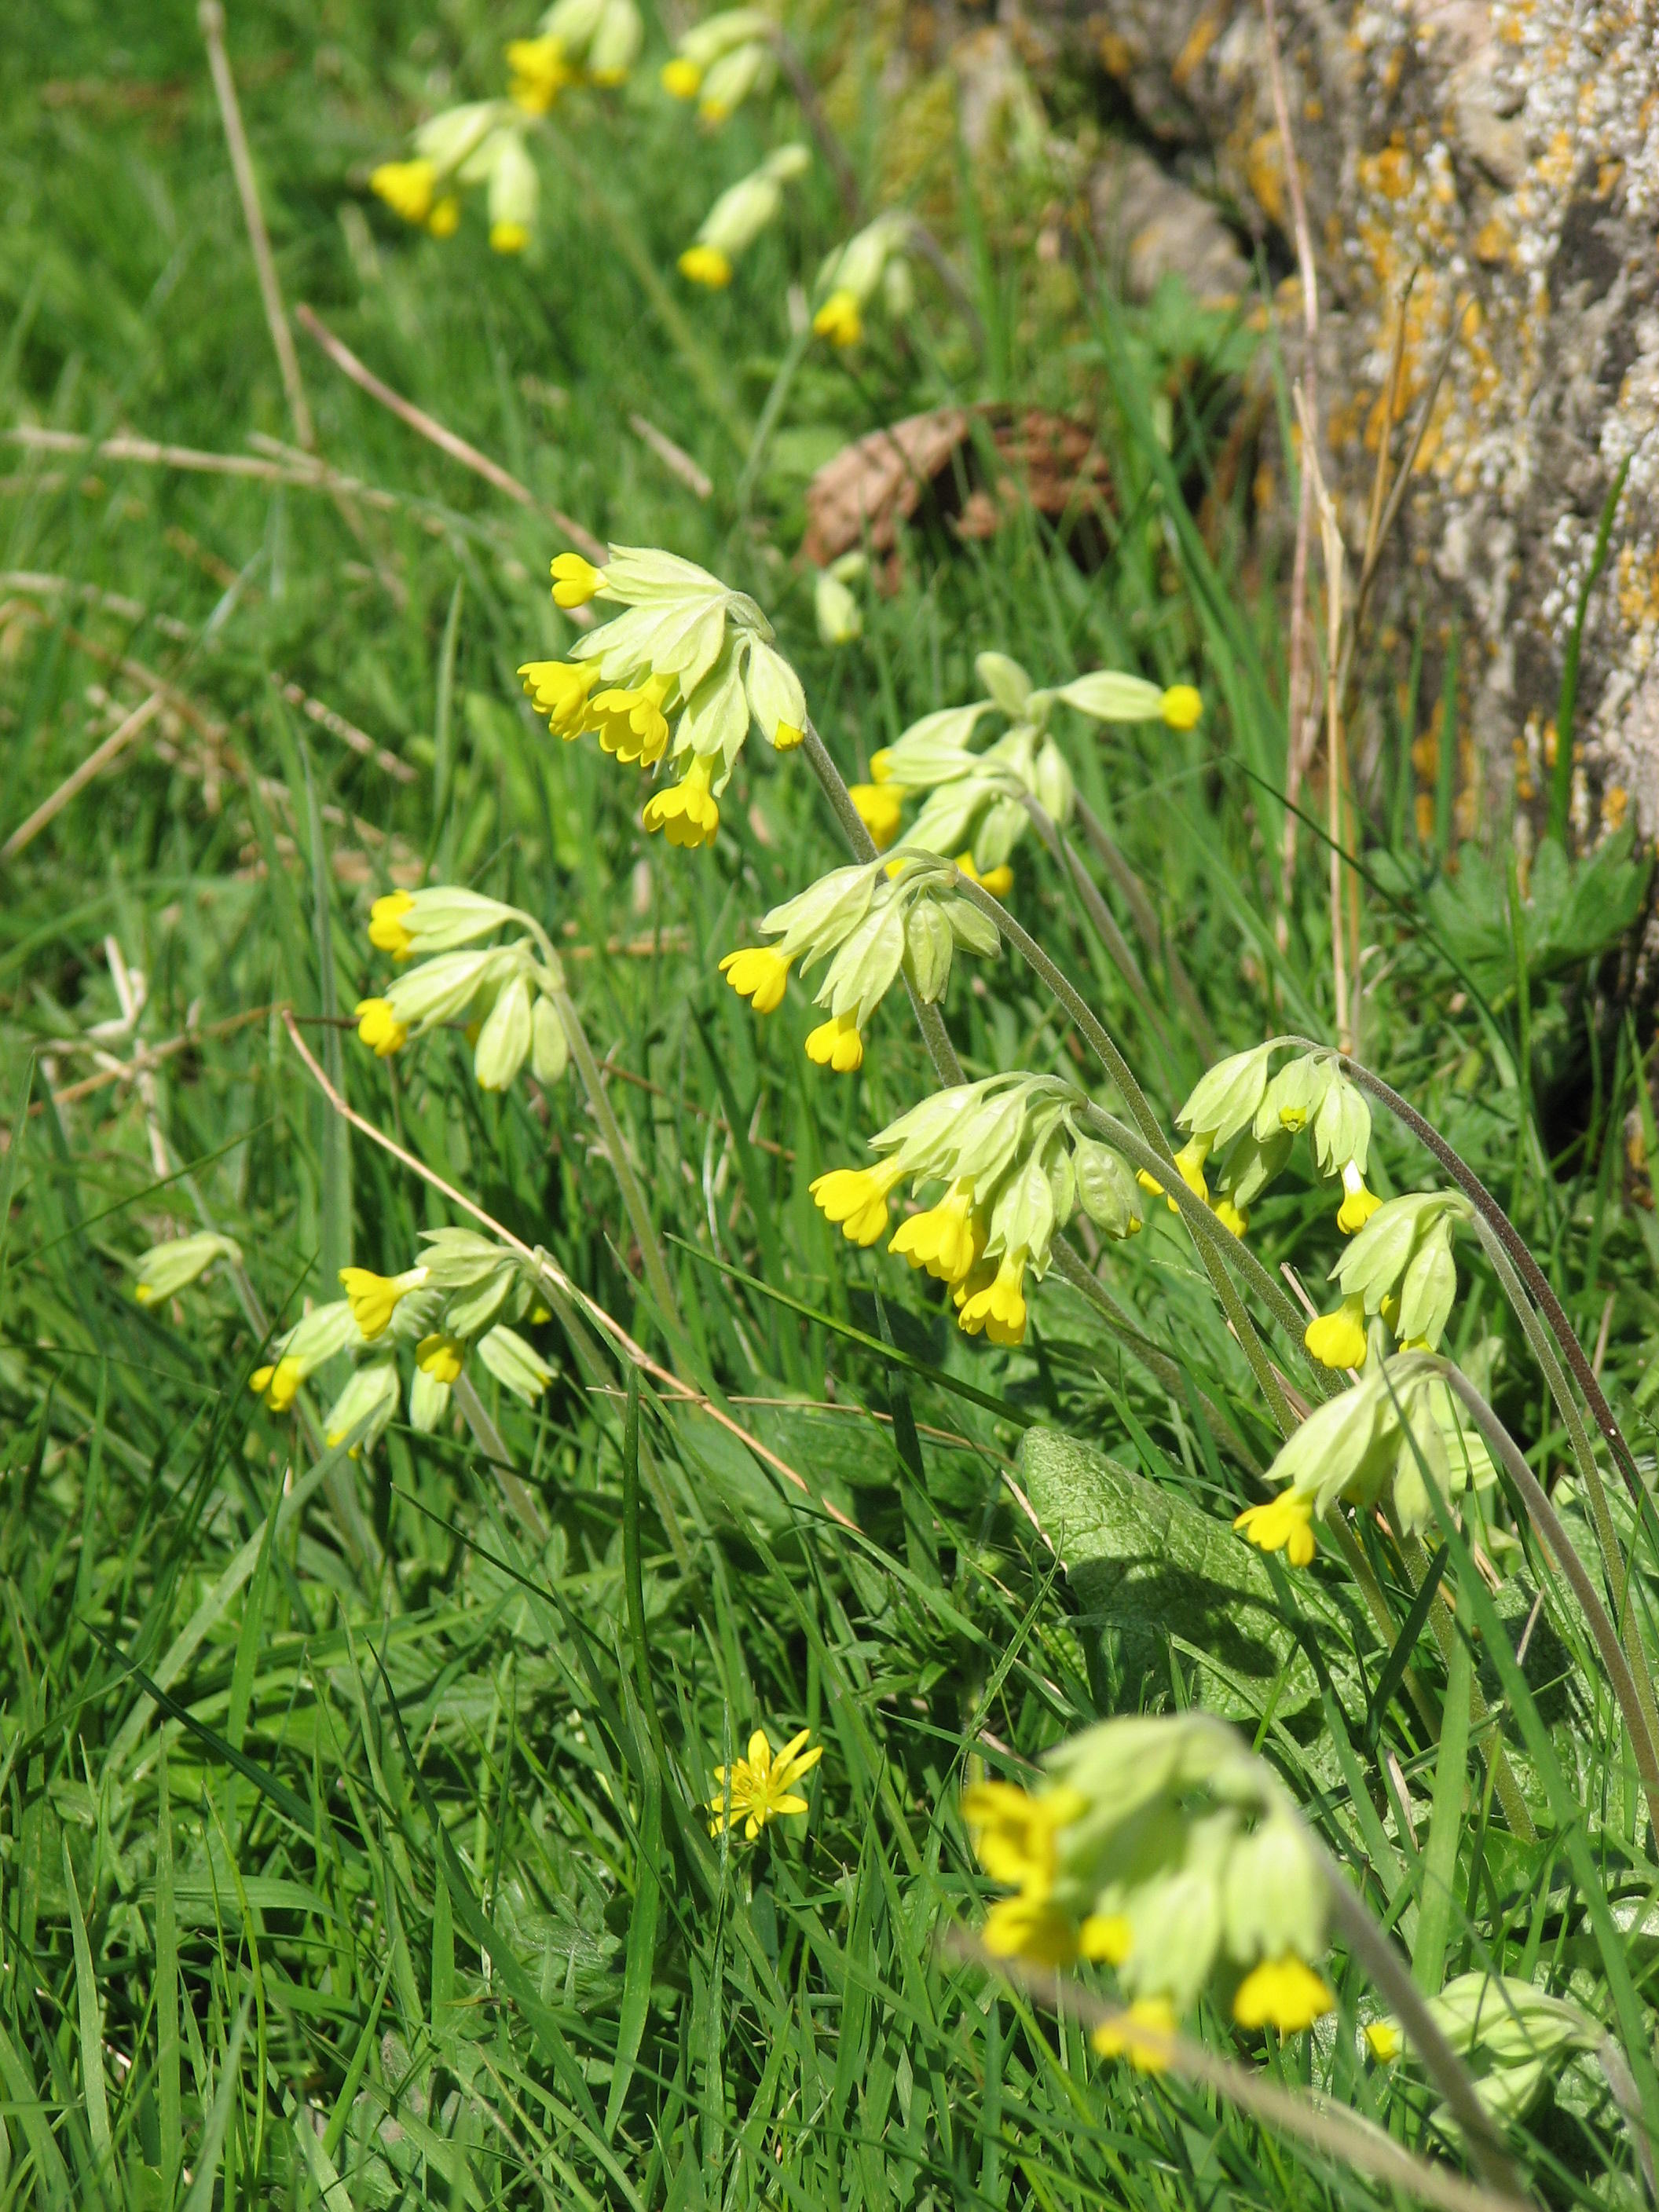 Cowslips, April 2010